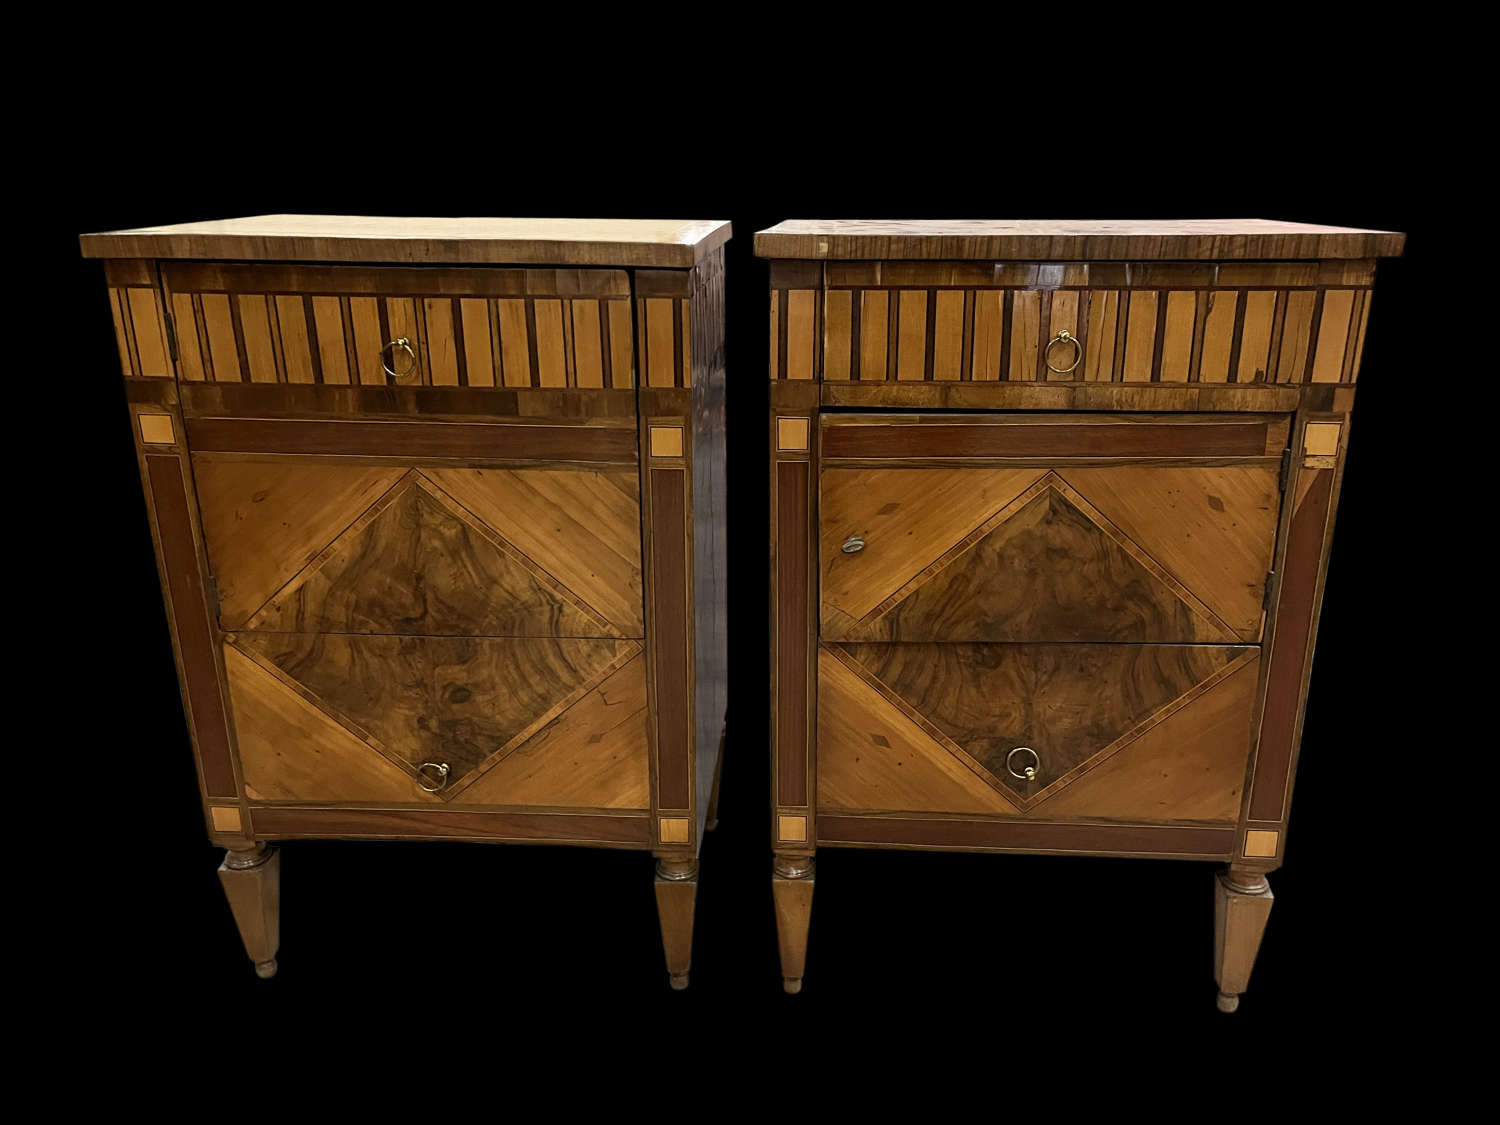 A FINE PAIR OF PARQUETRY COMMODINI ITALY C 1790